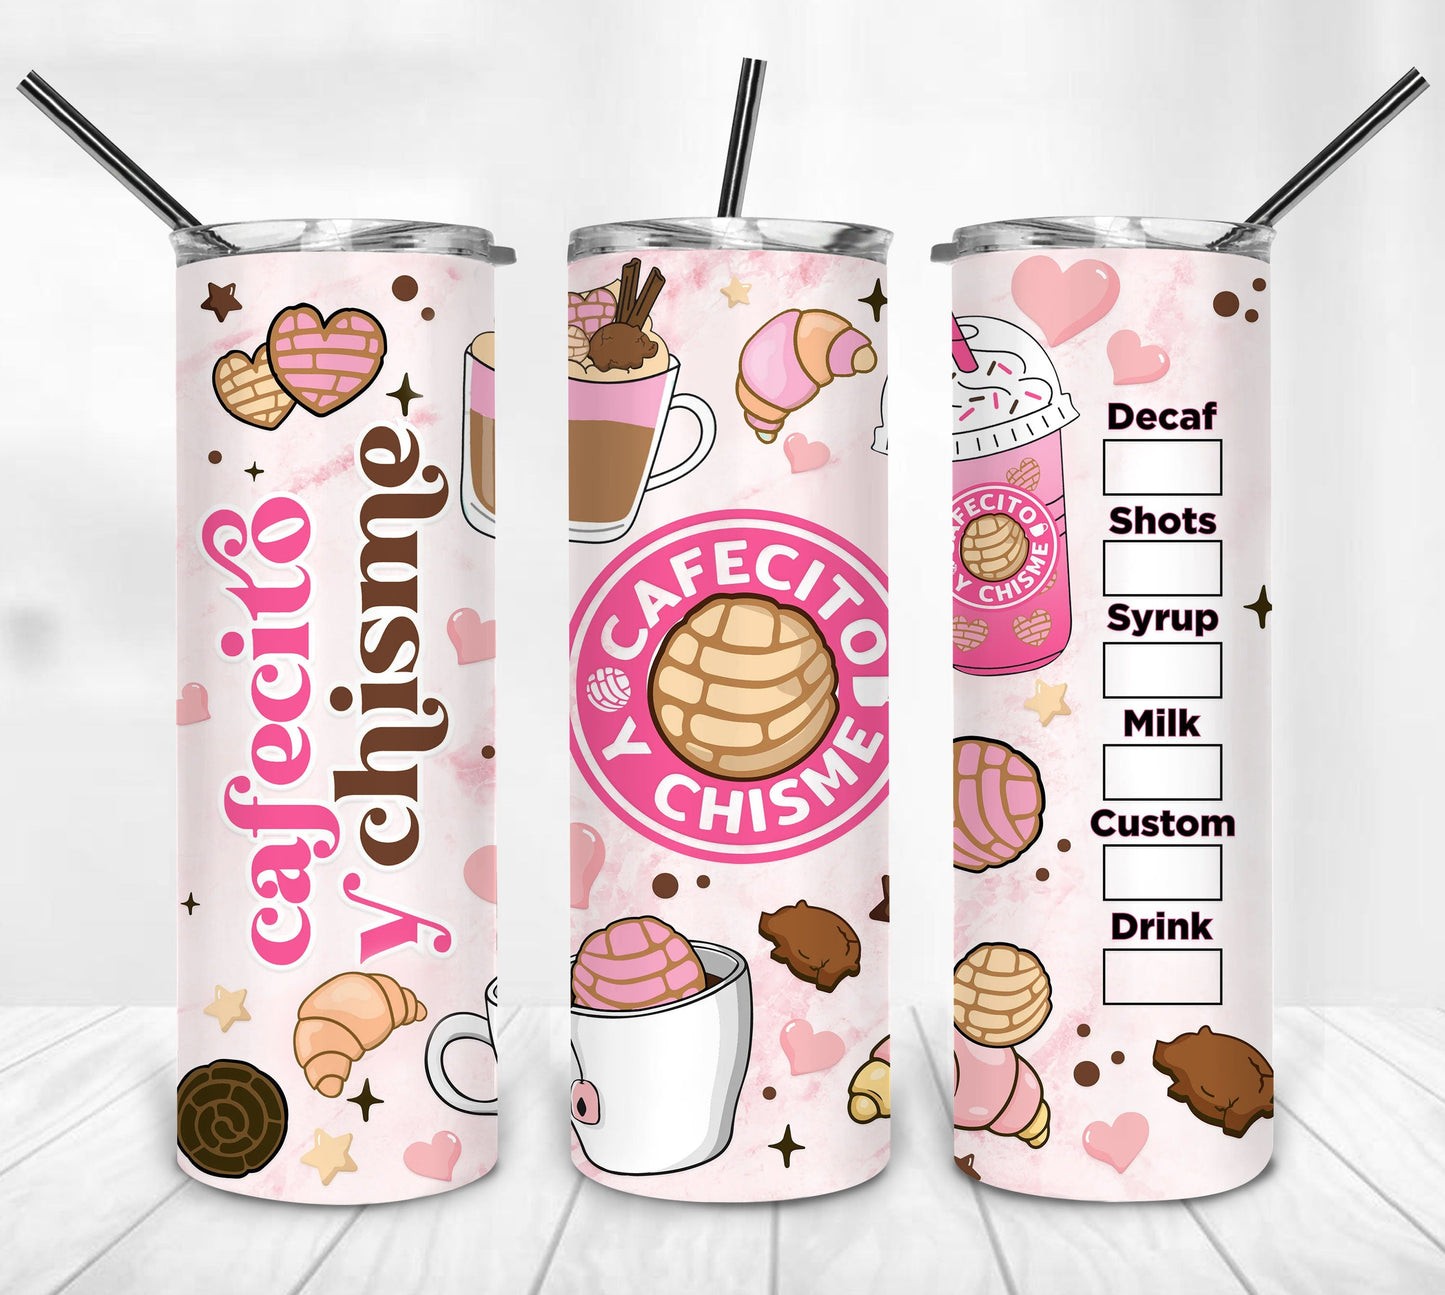 Cafecito y Chisme 20oz Skinny Coffee Tumbler, Mexico Pan Dulce 20oz Tumbler PNG, Spooky Conchas Tumbler Wrap, 20oz Skinny Tumbler Digital - VartDigitals